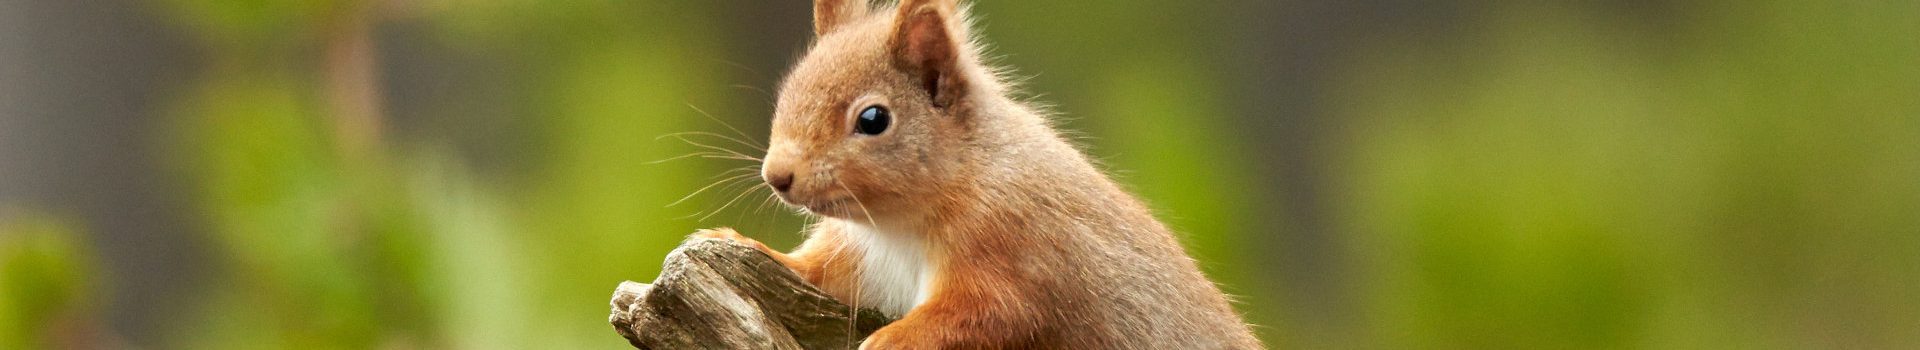 A red squirrel on a branch in the Scottish countryside